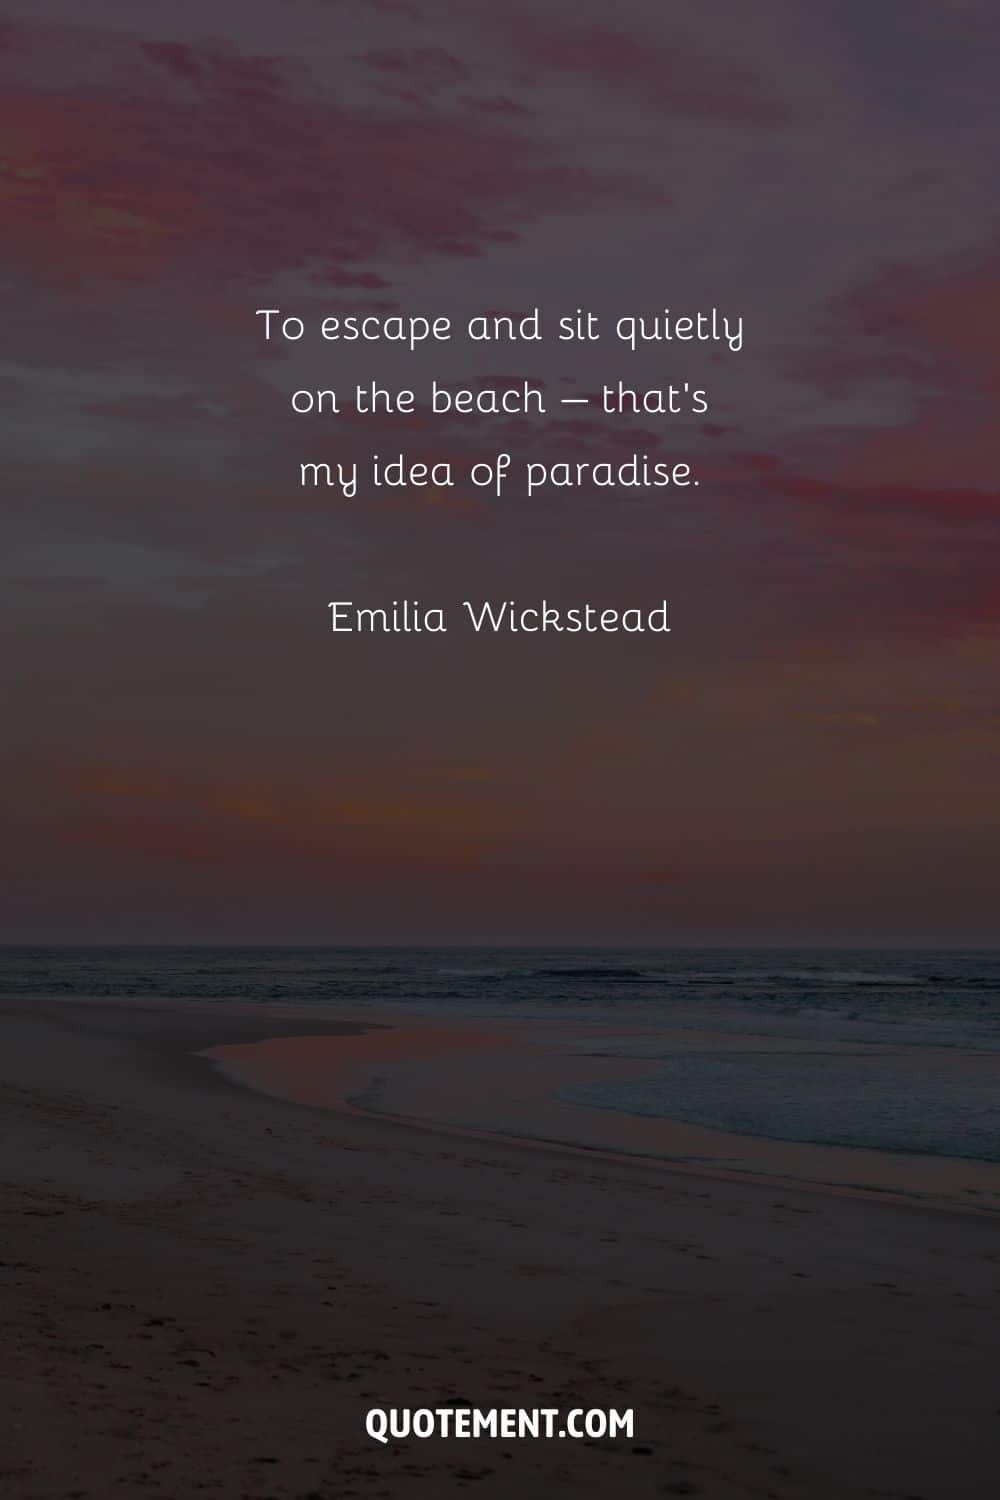 To escape and sit quietly on the beach – that's my idea of paradise. – Emilia Wickstead